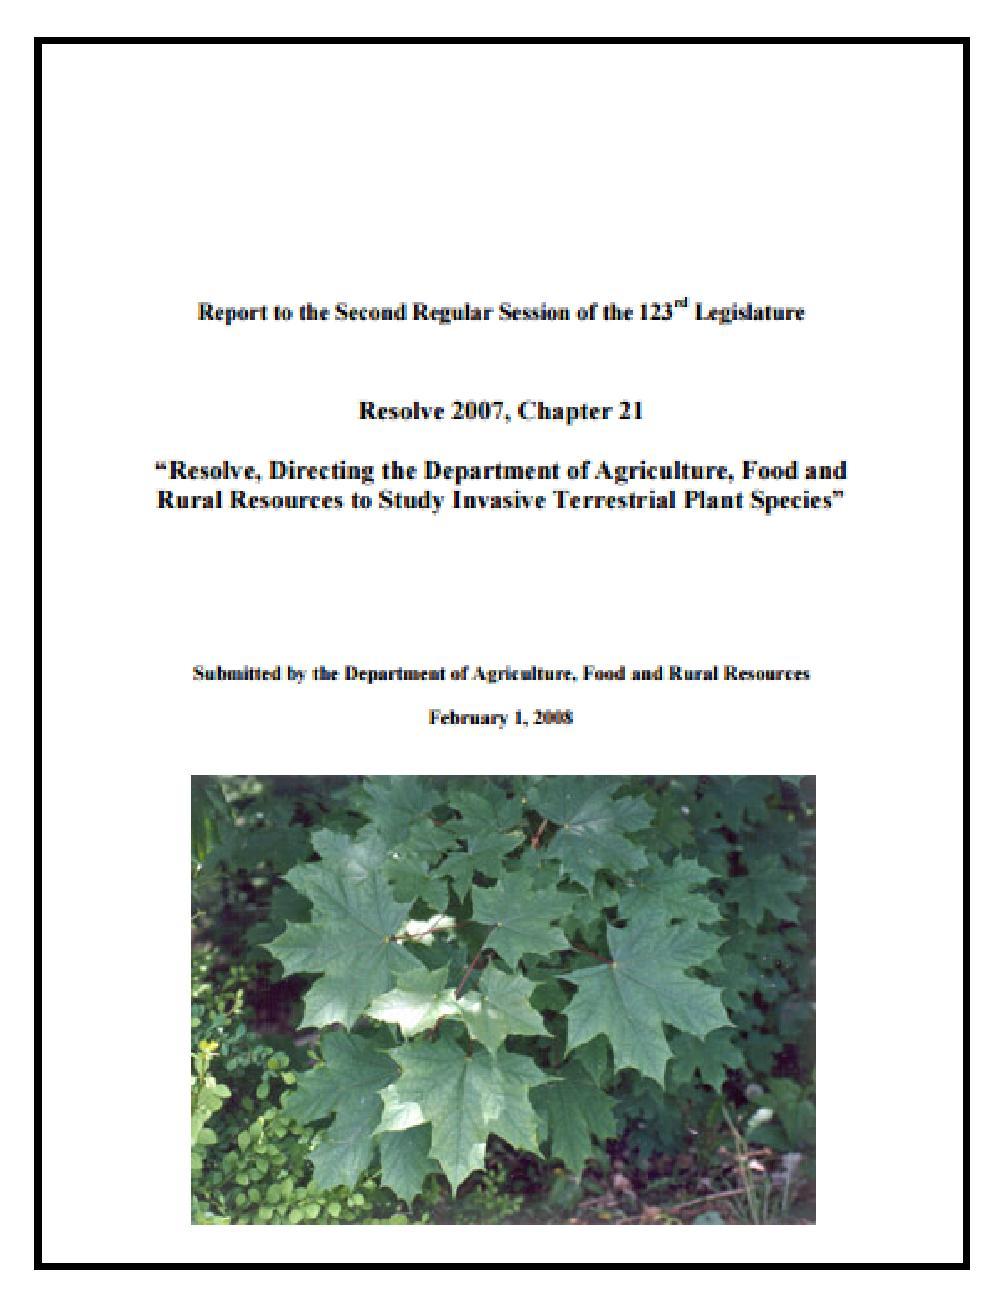 terrestrial plants is presented to the legislature 2011 - A new rule,